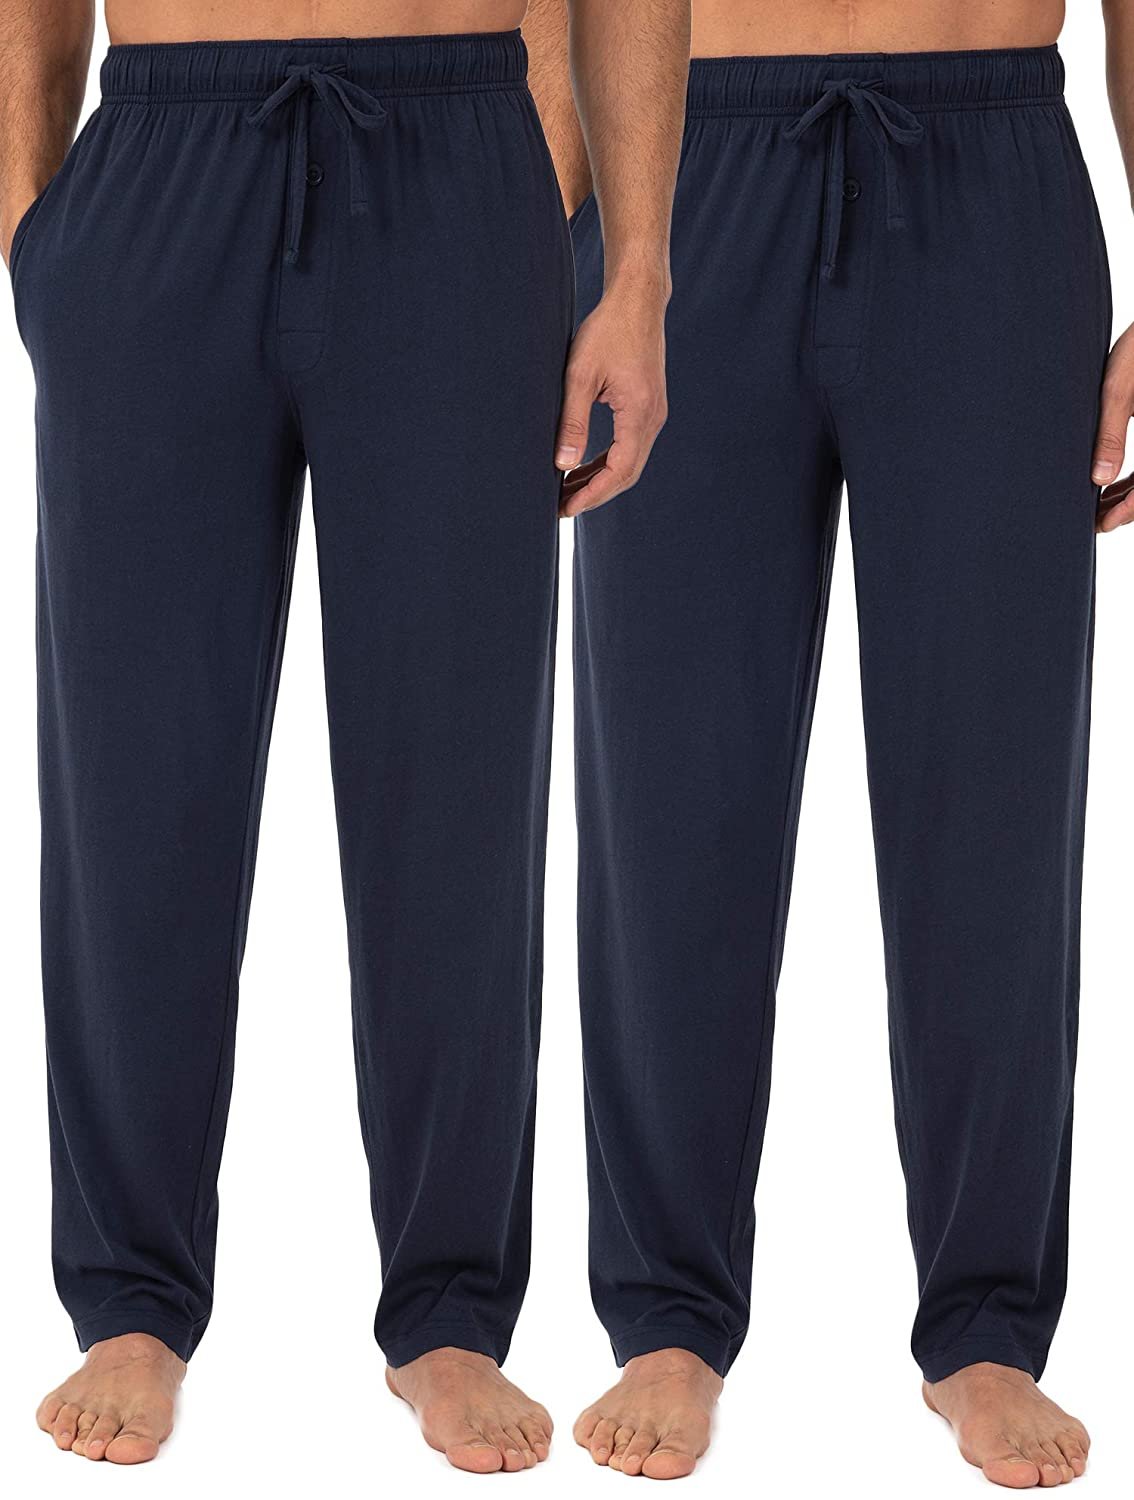 1 & 2 Packs Fruit of the Loom Men's Extended Sizes Jersey Knit Sleep Pant 